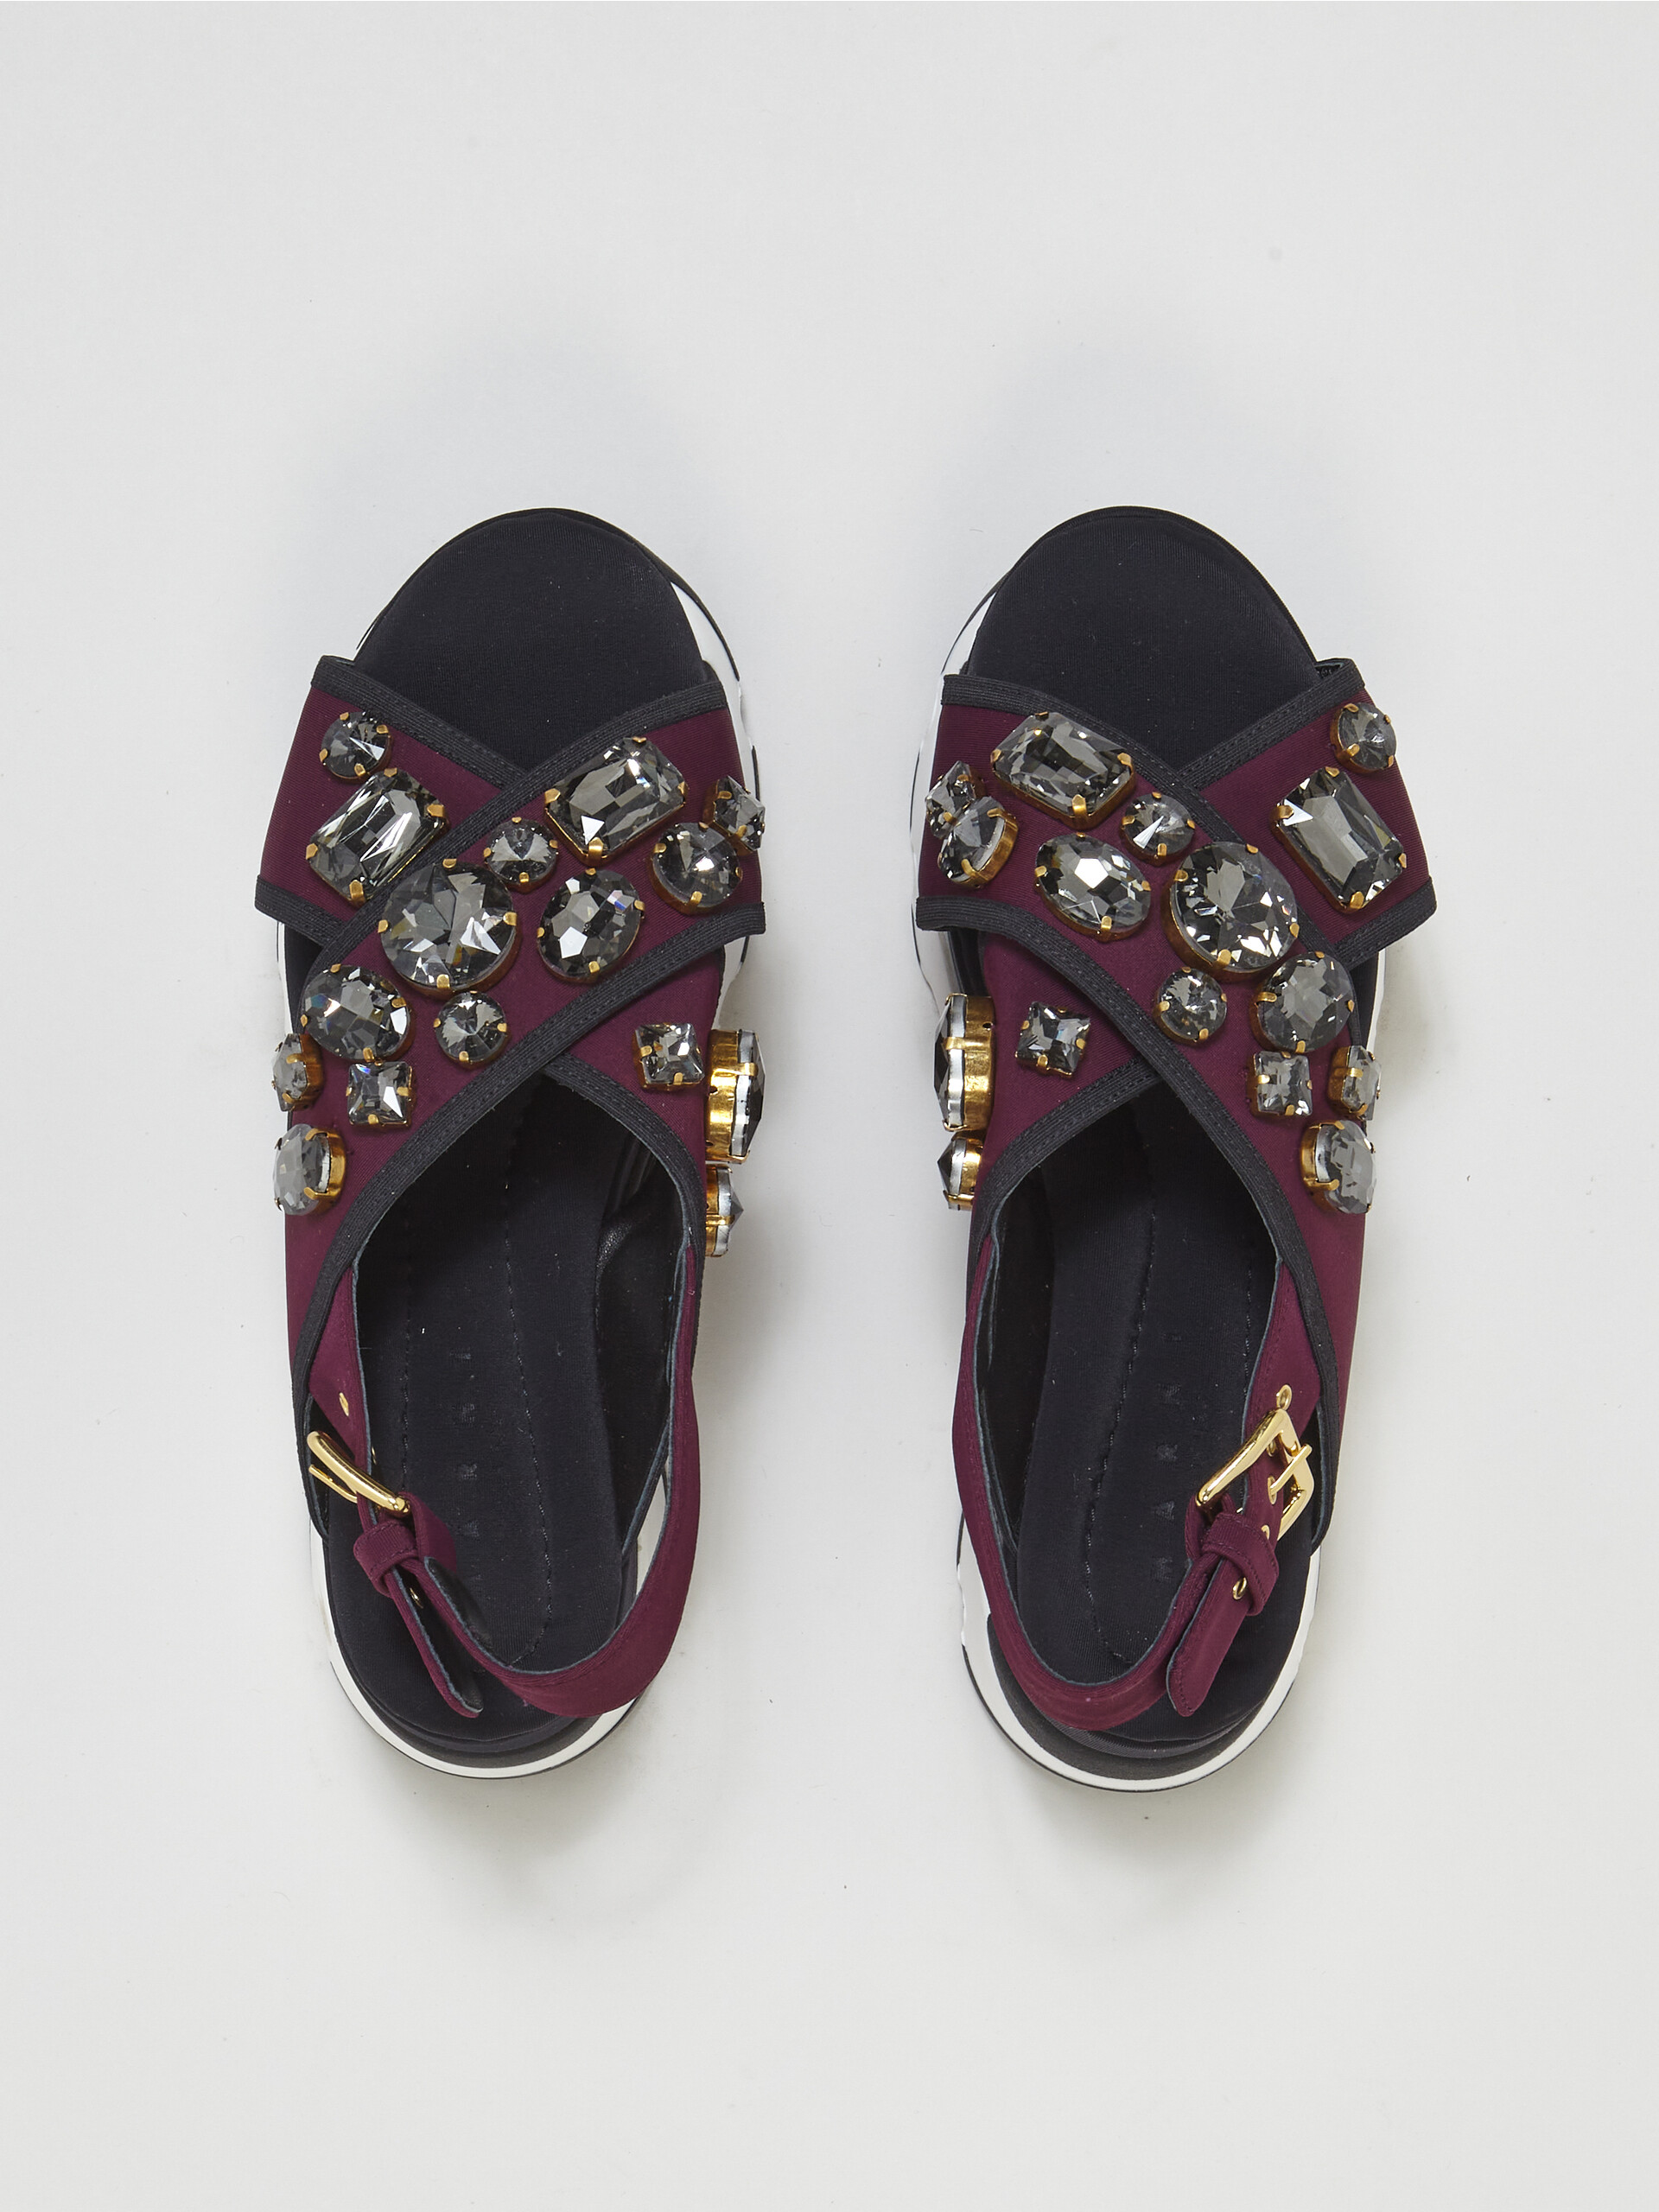 Burgundy and black wedge in technical fabric - Sandals - Image 4